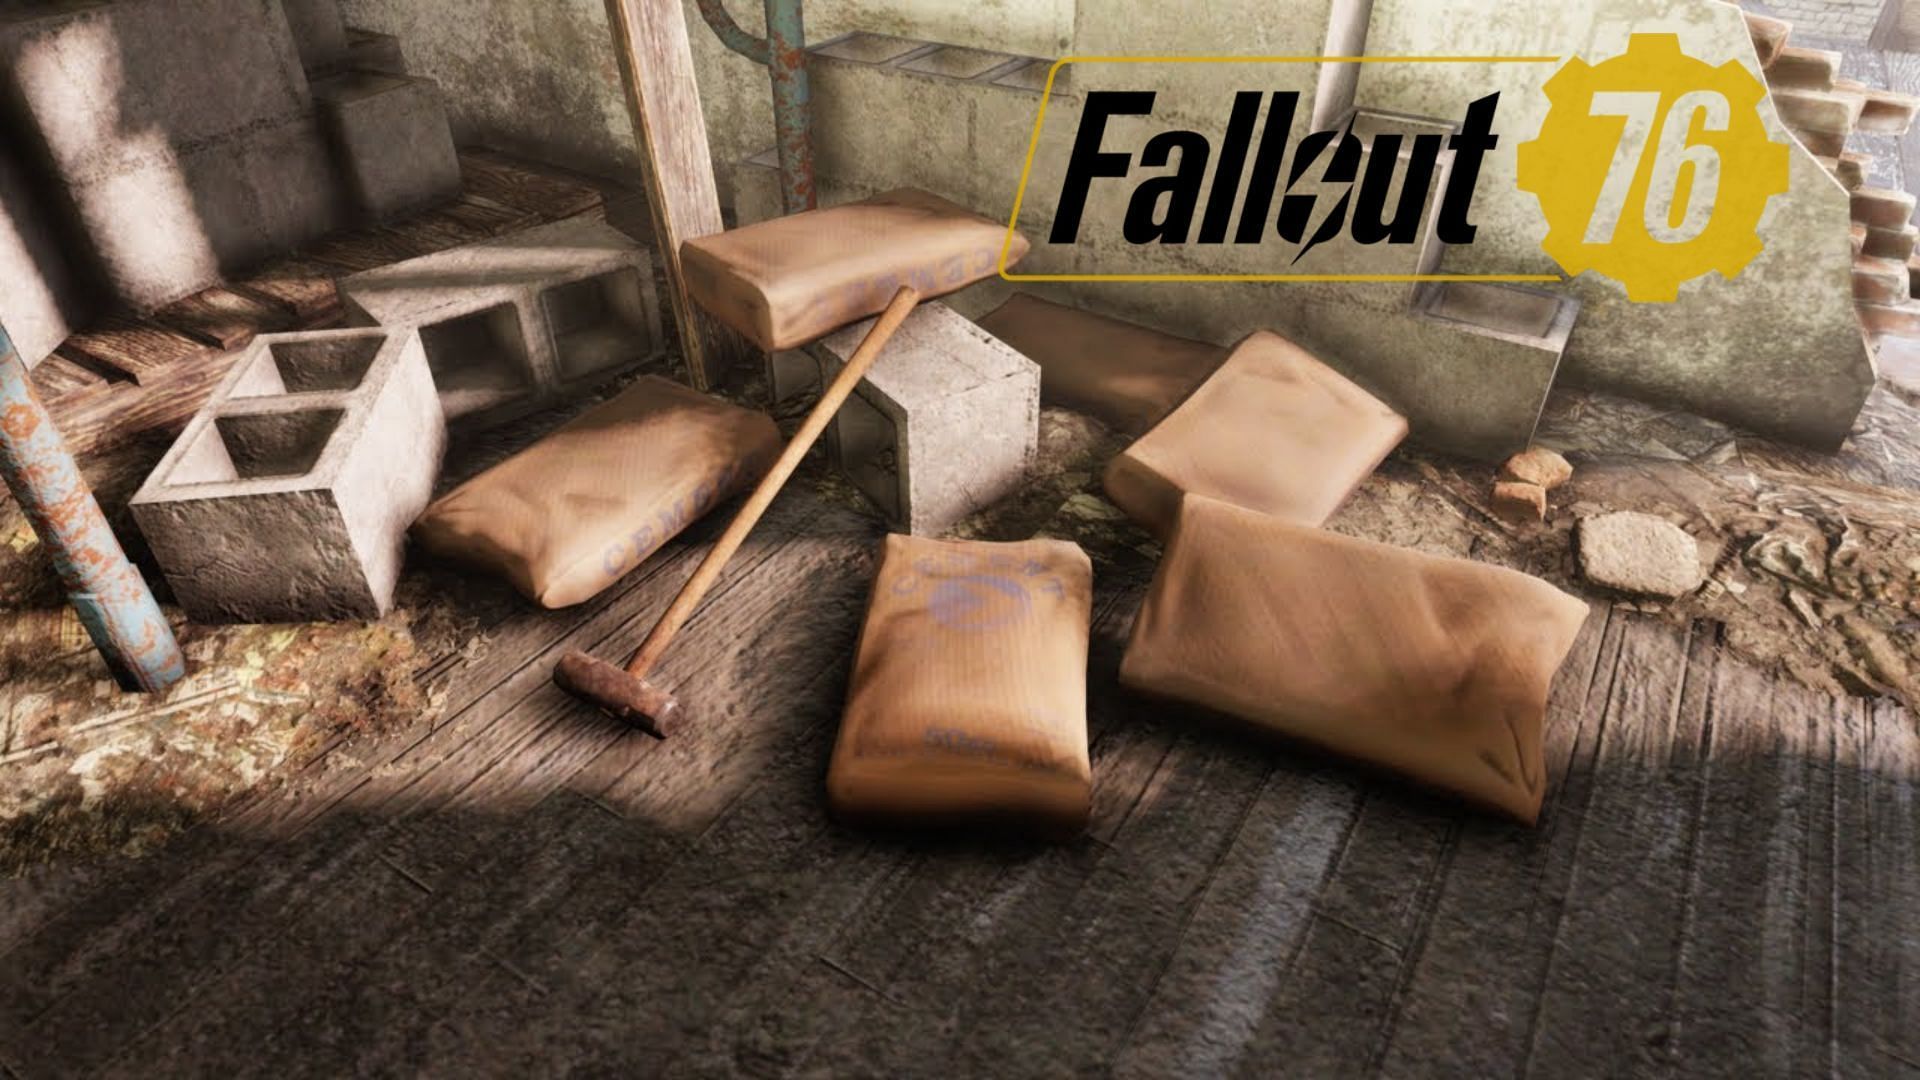 Players can acquire a large amount of Concrete through Concrete Bags (Image via Bethesda Game Studios)